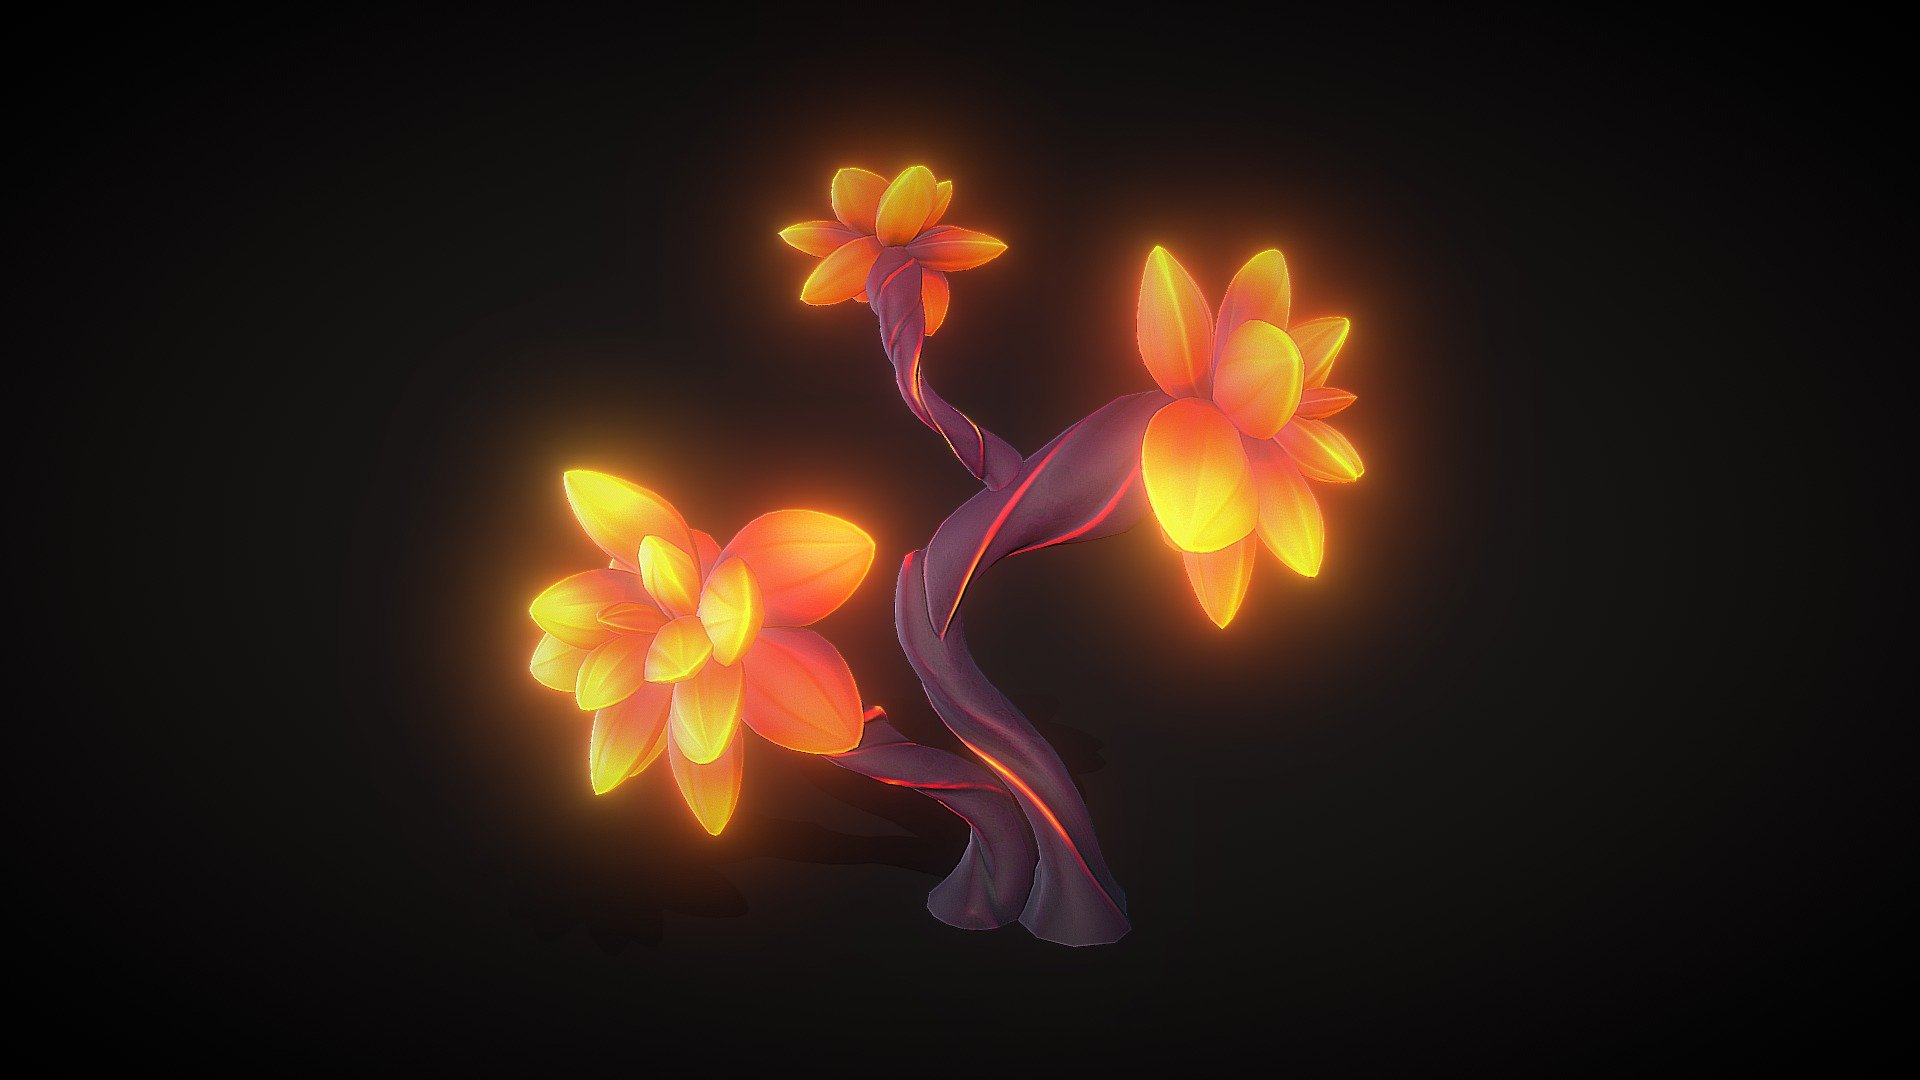 This is one of the 3d models for a set of fabulous plants. Used for the AR-scene on the Unity or Unreal Engine 3d model